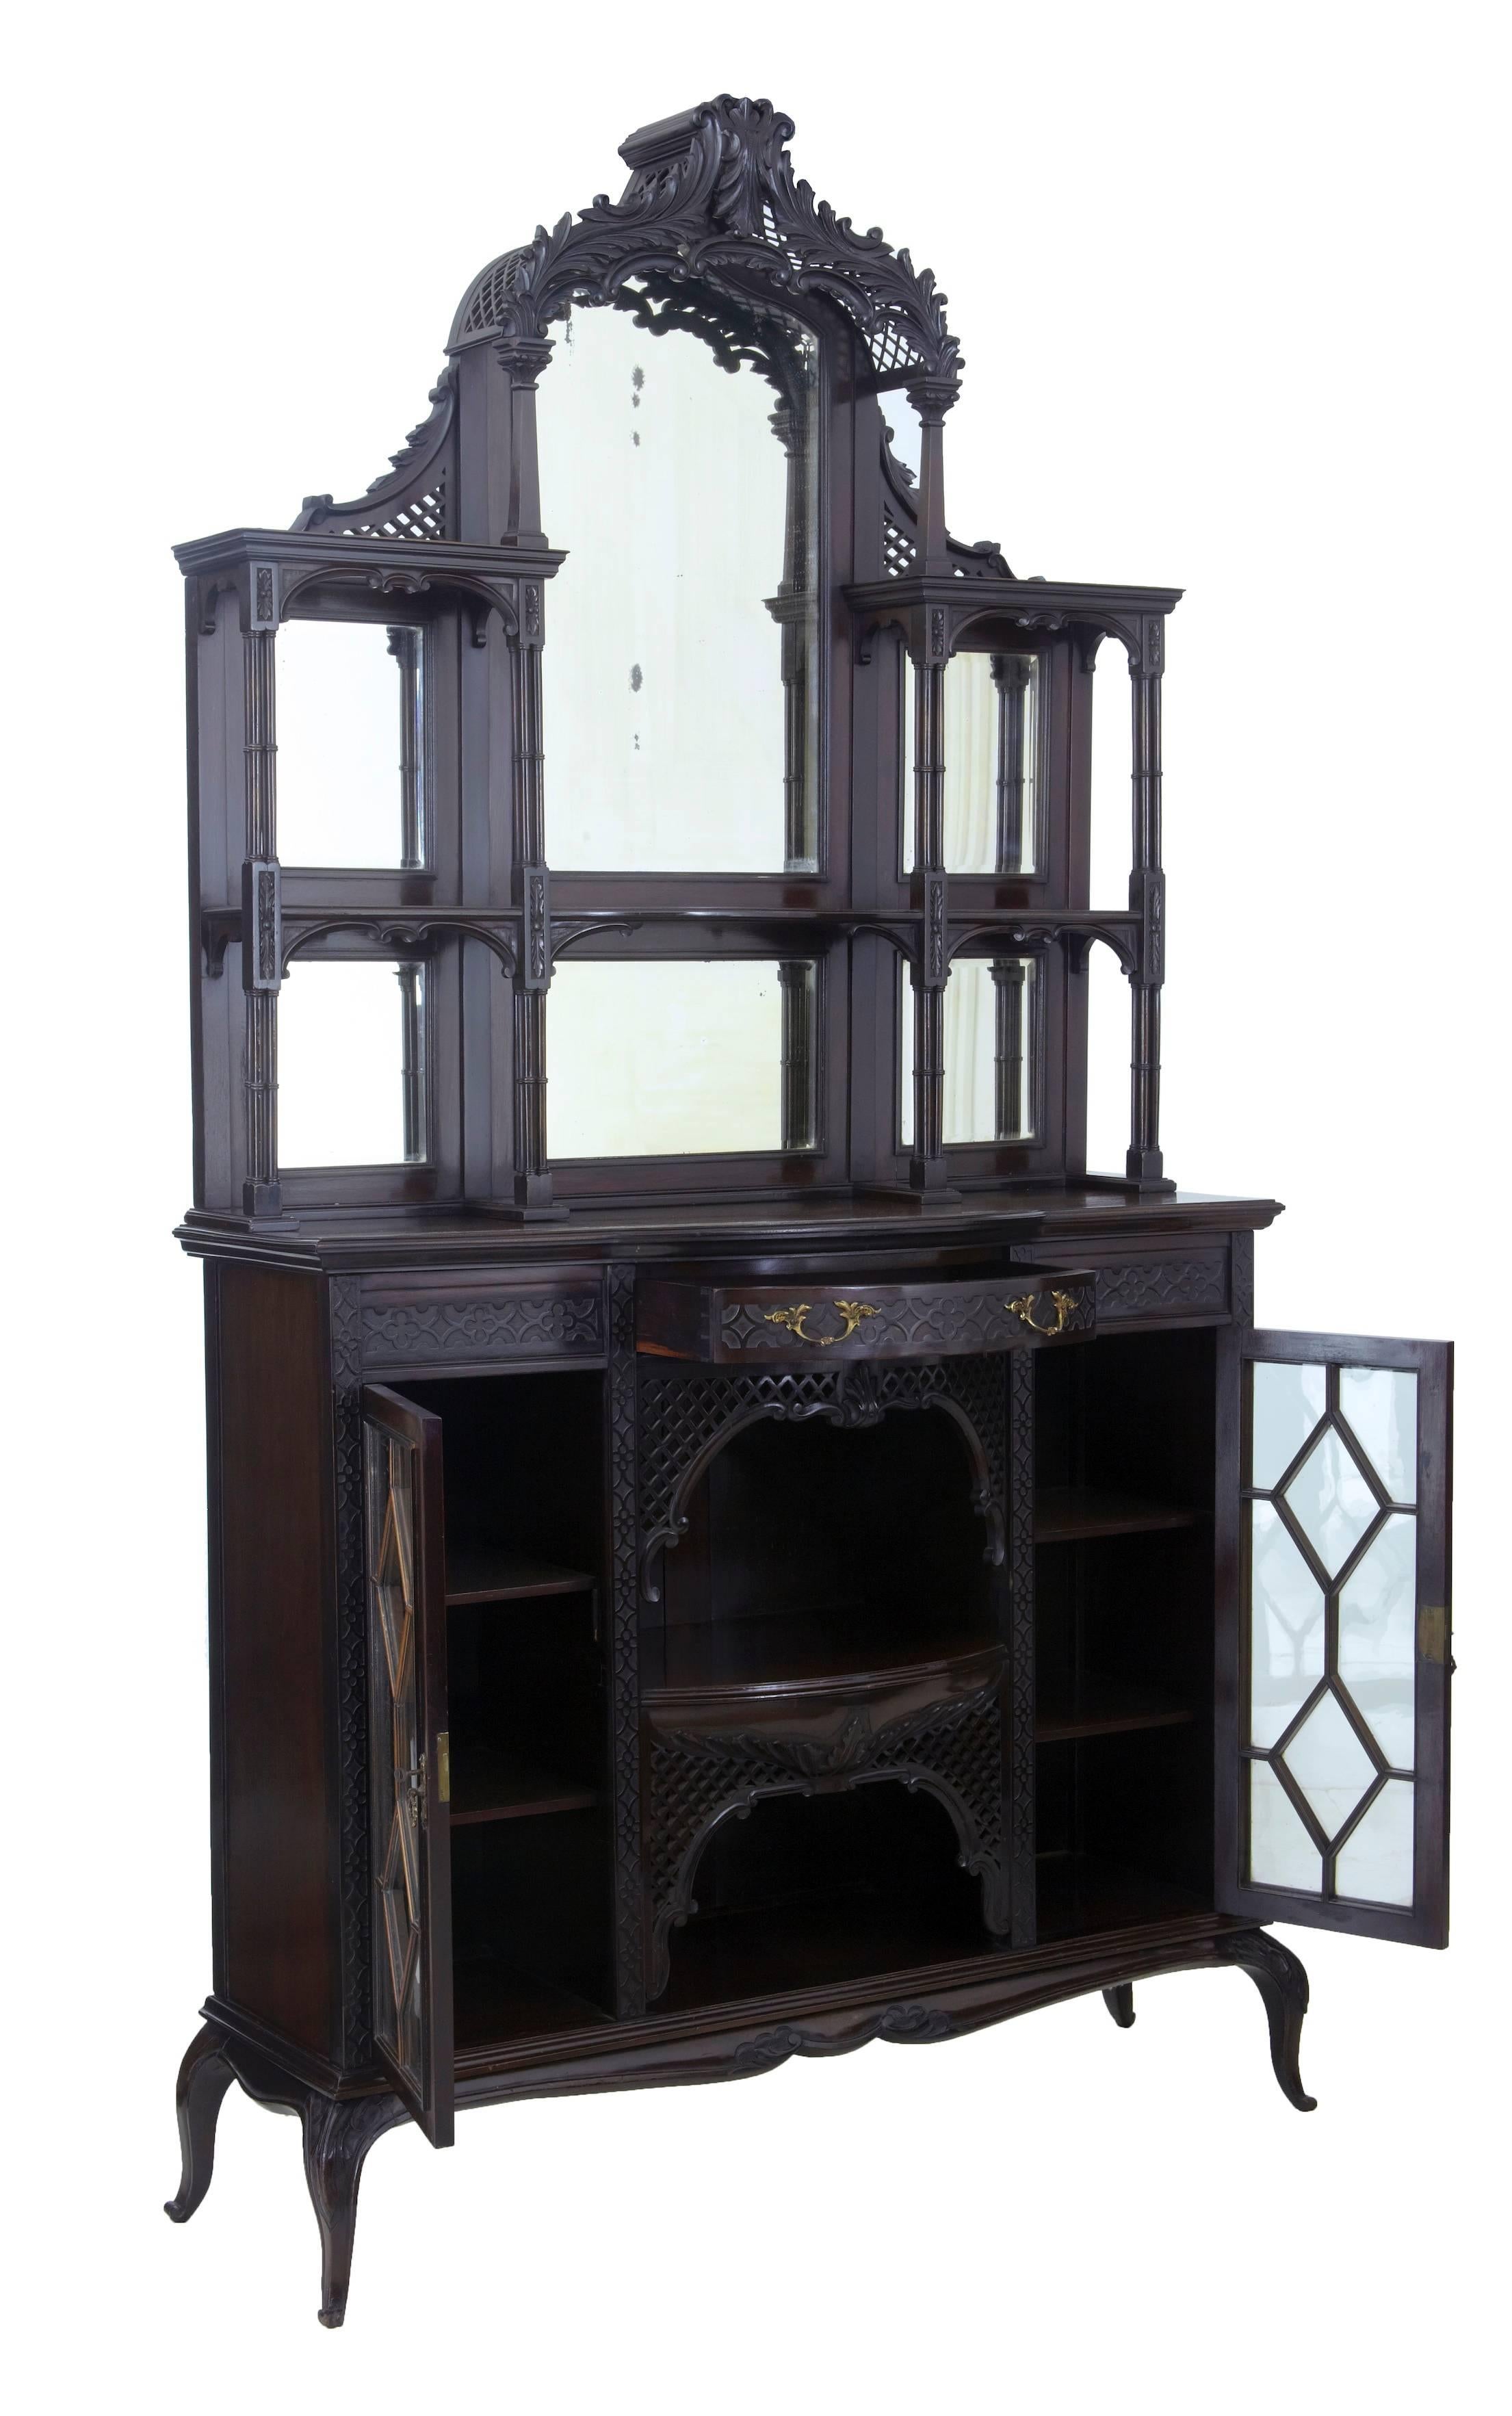 Two part Edwardian mirrored cabinet in the Chippendale taste, circa 1905.
Top section comprising of six mirrors surmounted by carved lattice canopy. Tiers linked together by quad turned columns.
Bottom section of a single drawer with two cupboard